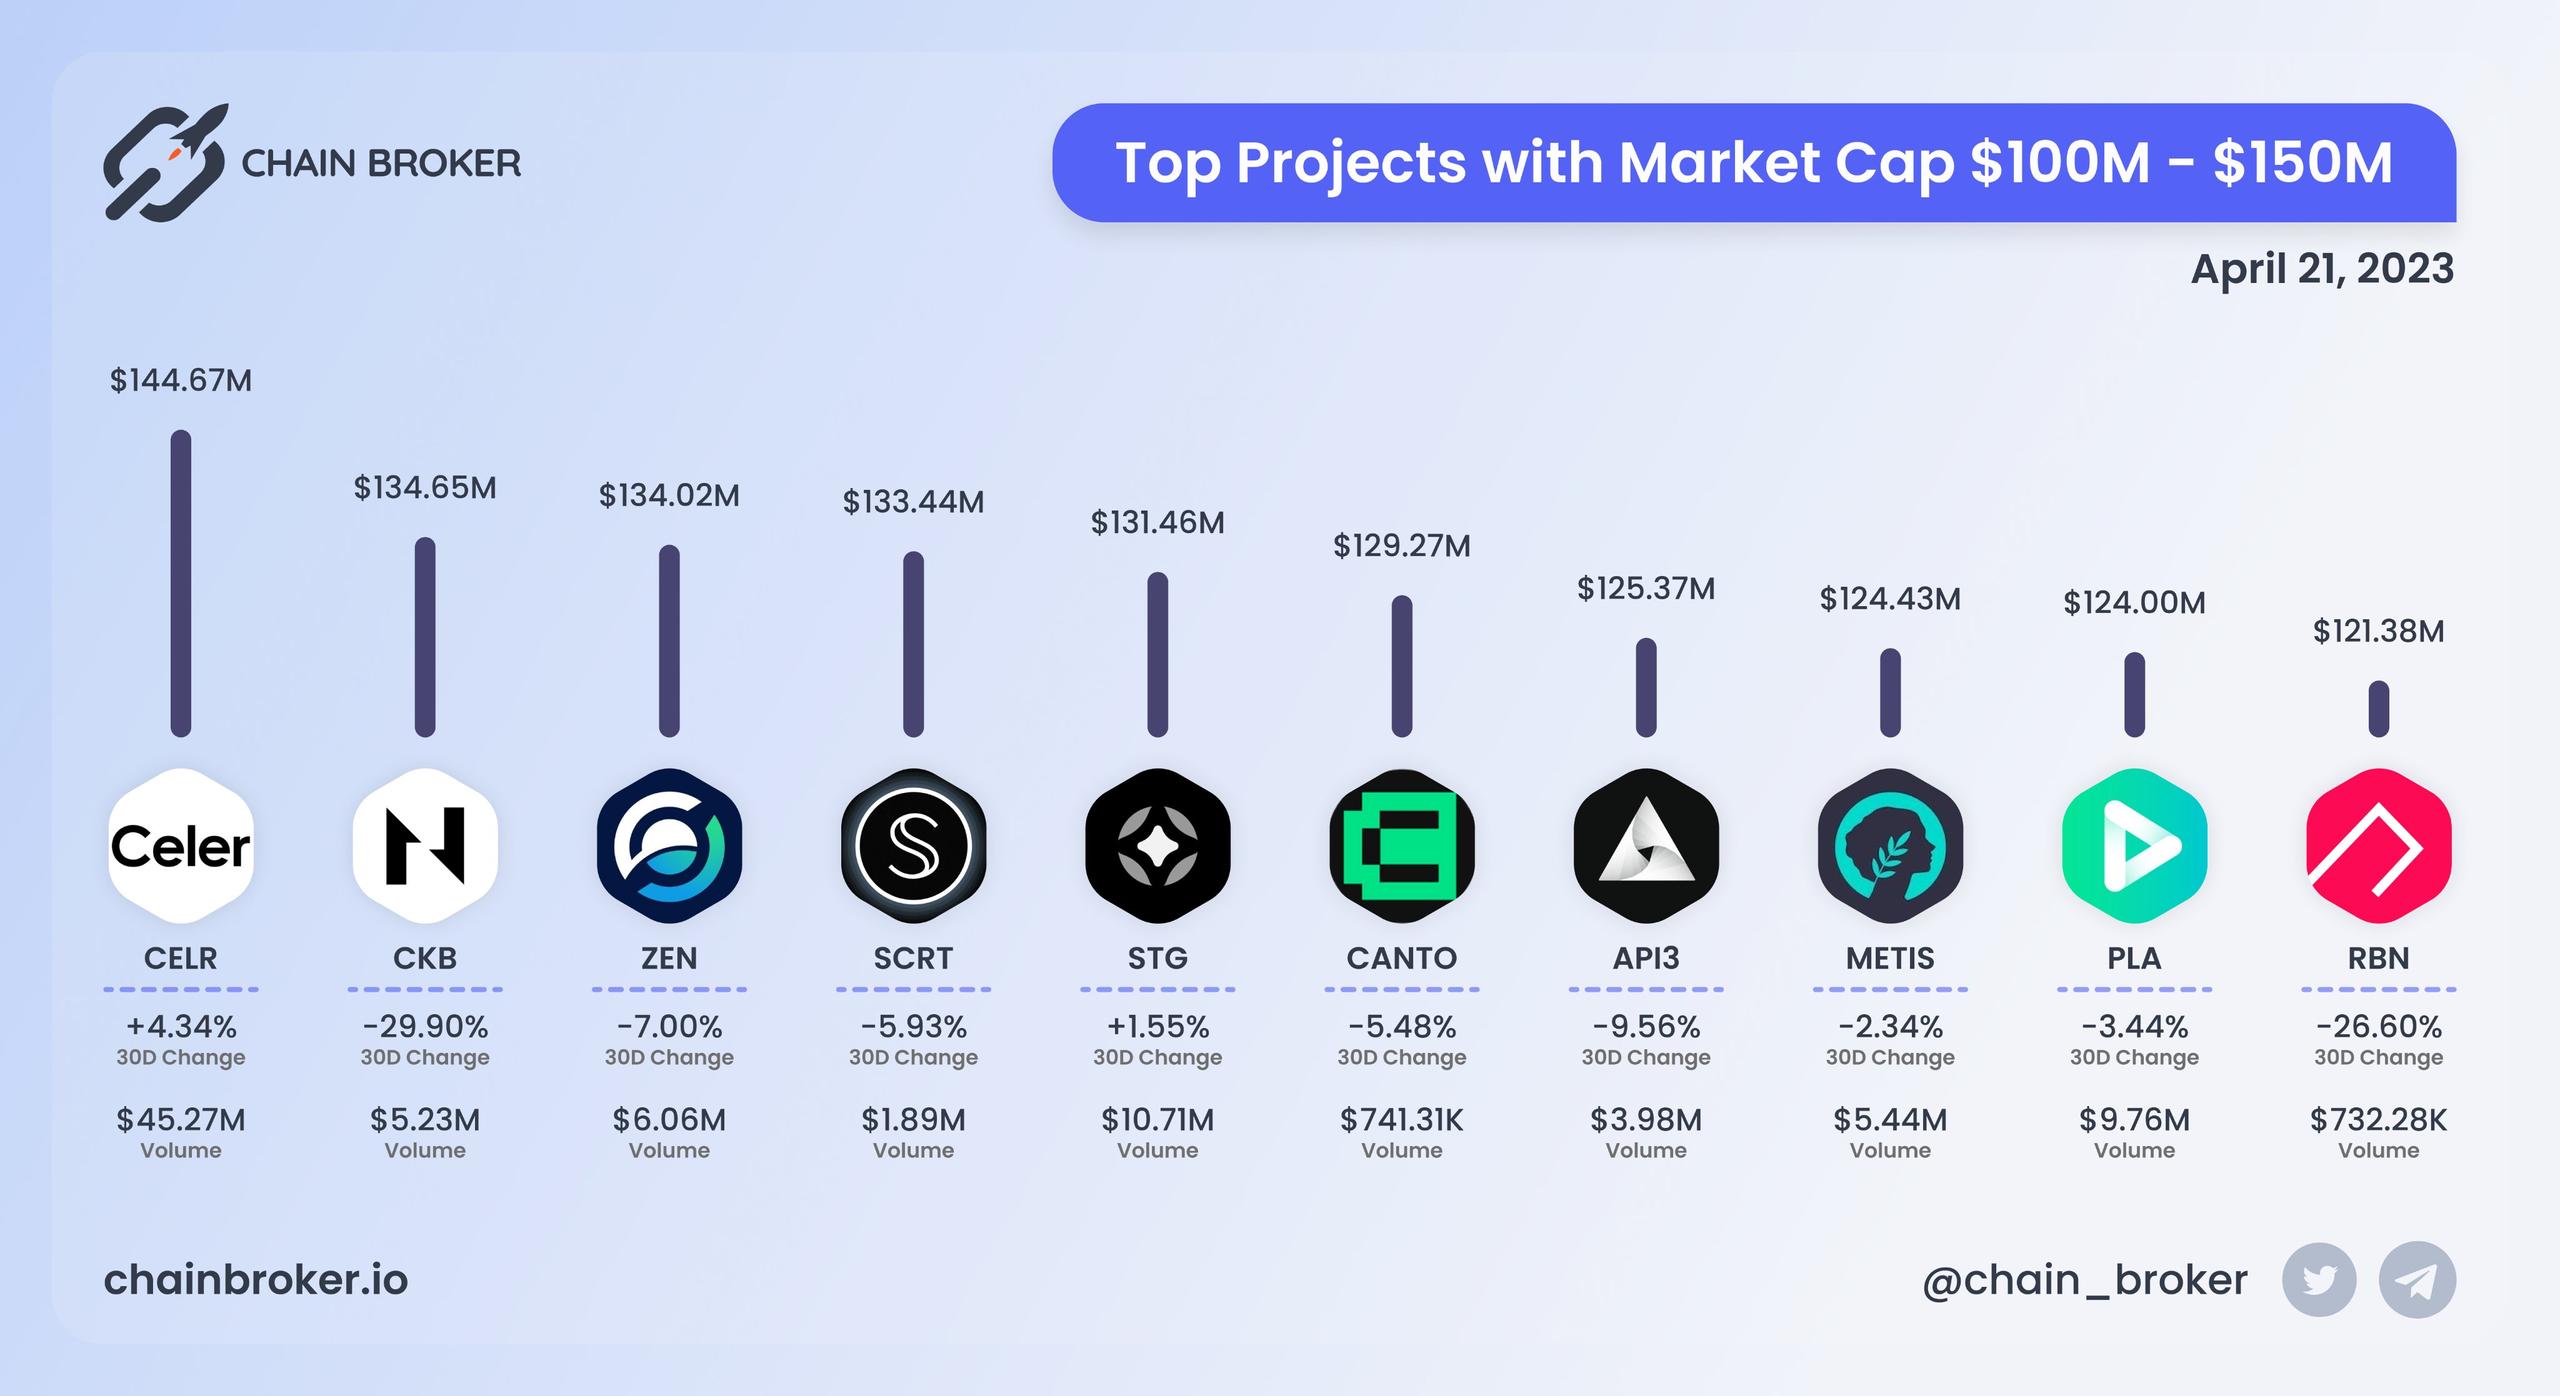 Top projects with Market Cap $100M - $150M